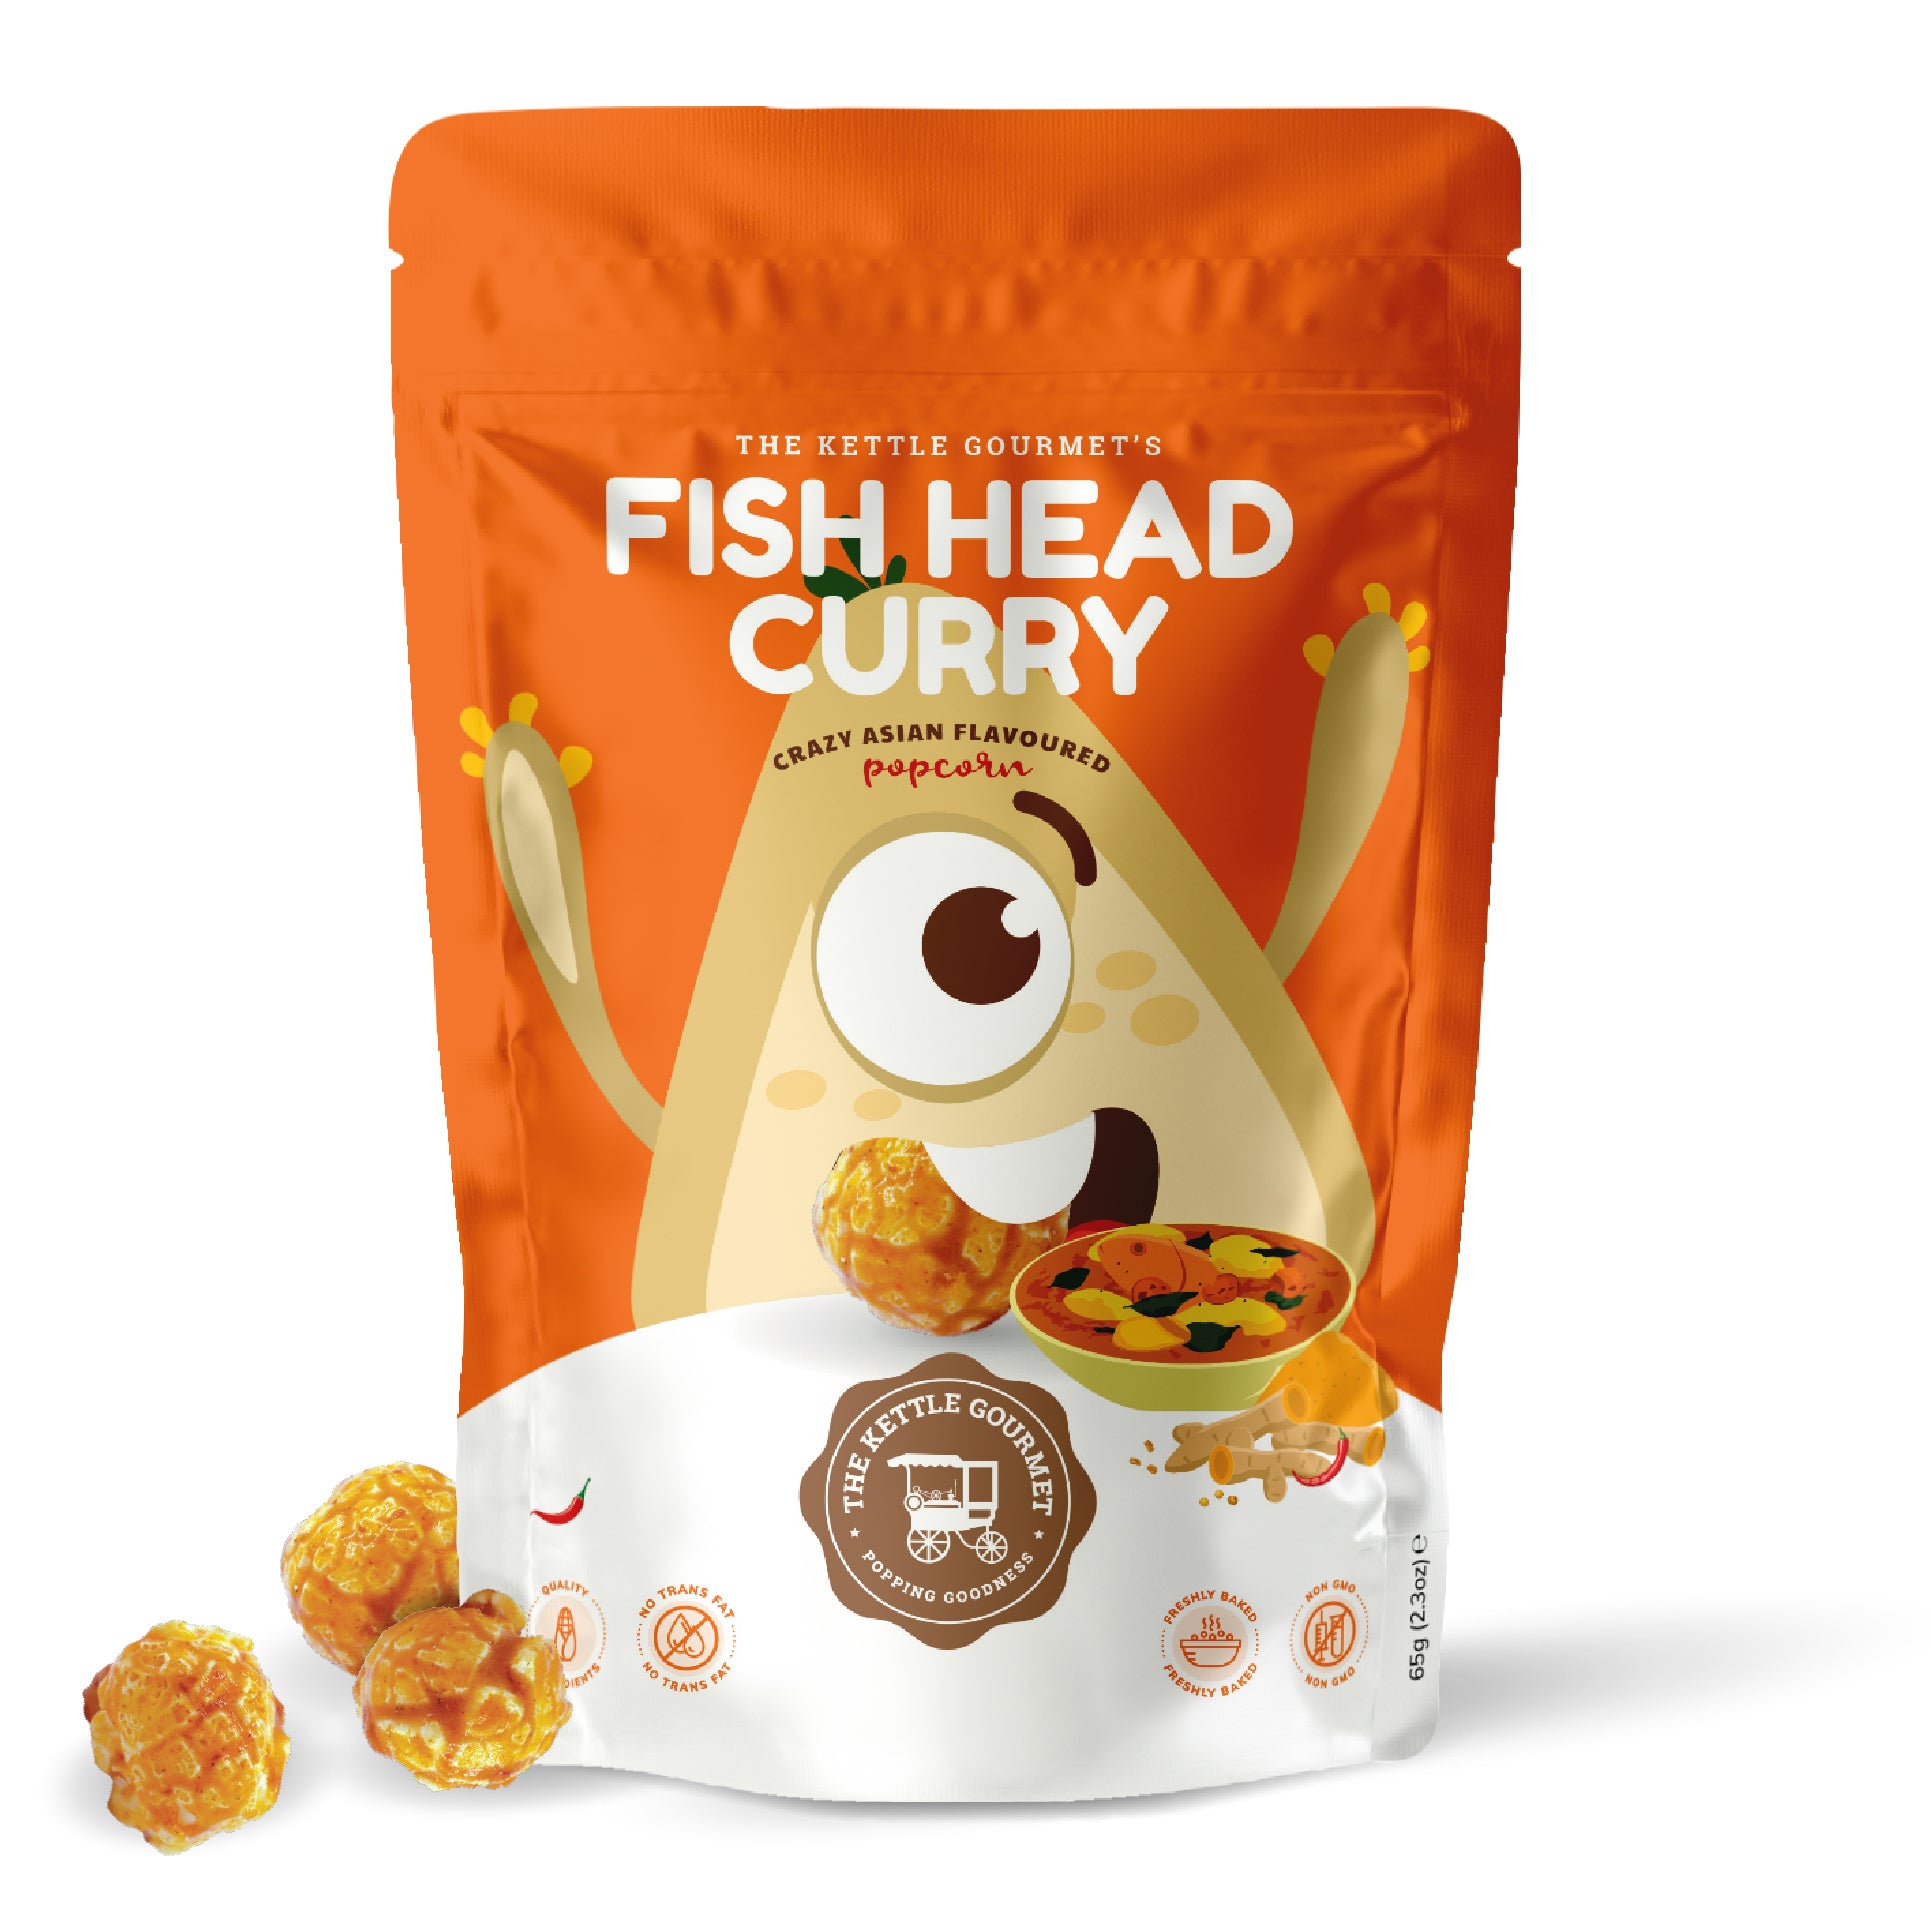 TKG Fish Head Curry (Crazy Asian Flavoured Popcorn)